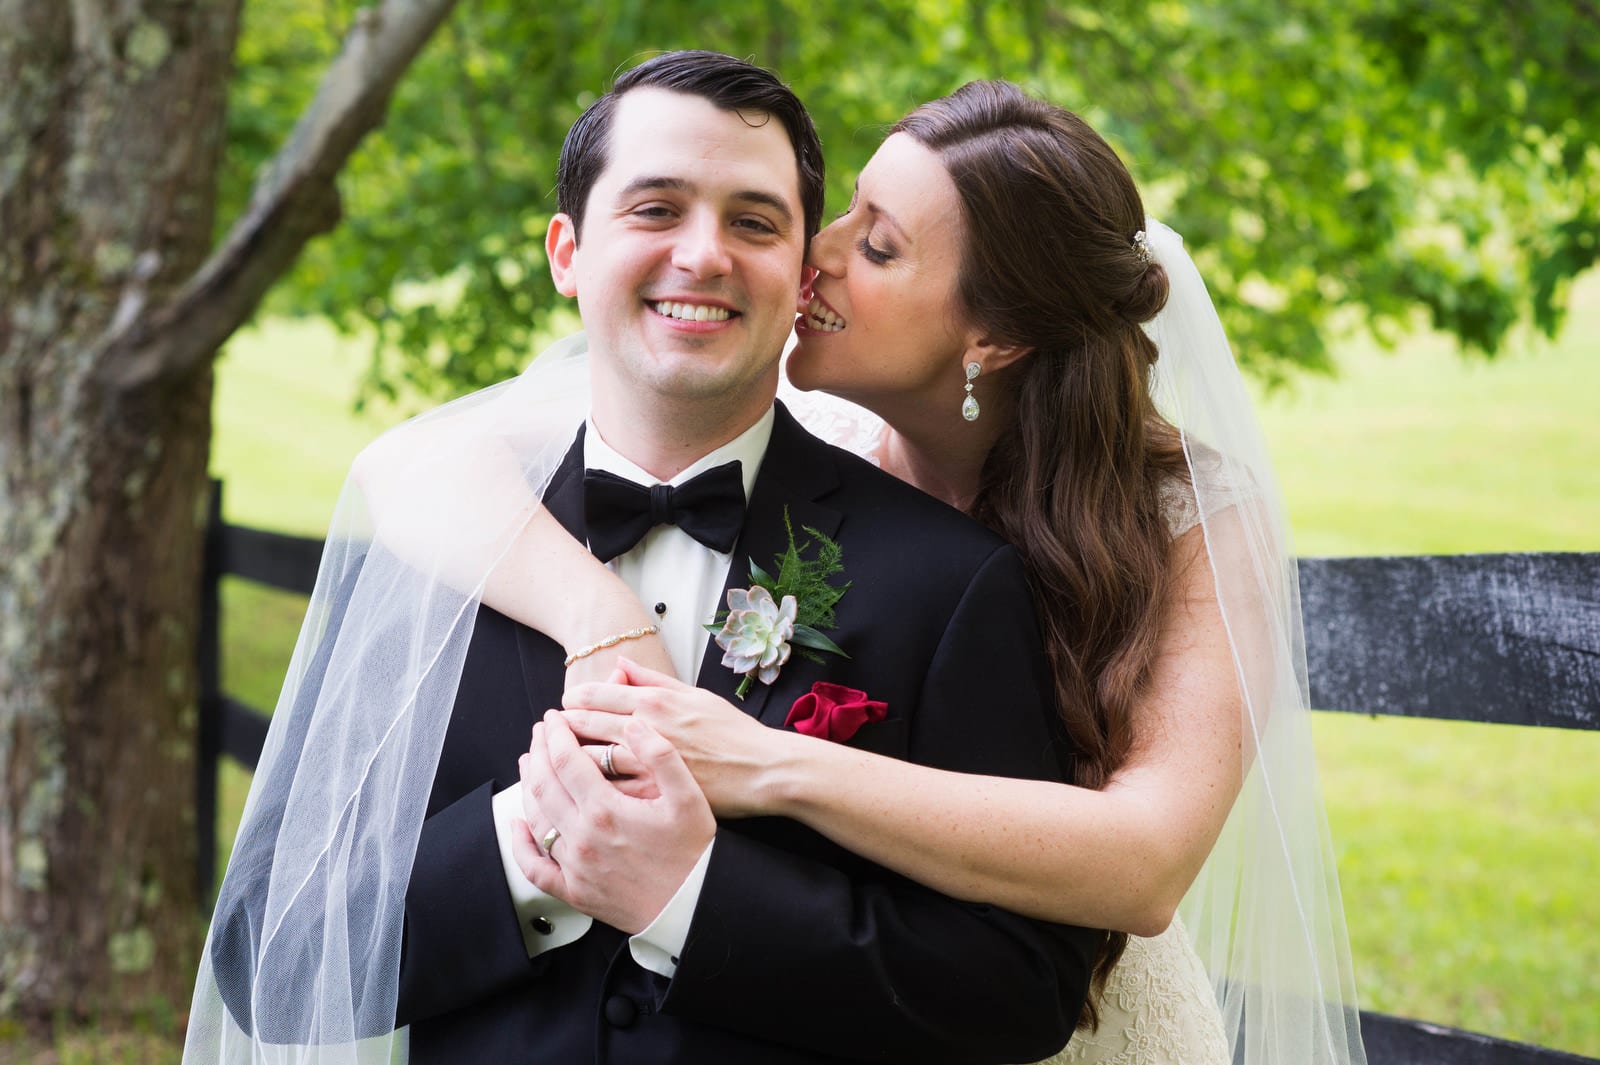 A bride and groom stand in a field next to a split rail fence. She hugs him from behind and bites his earlobe as he smiles.